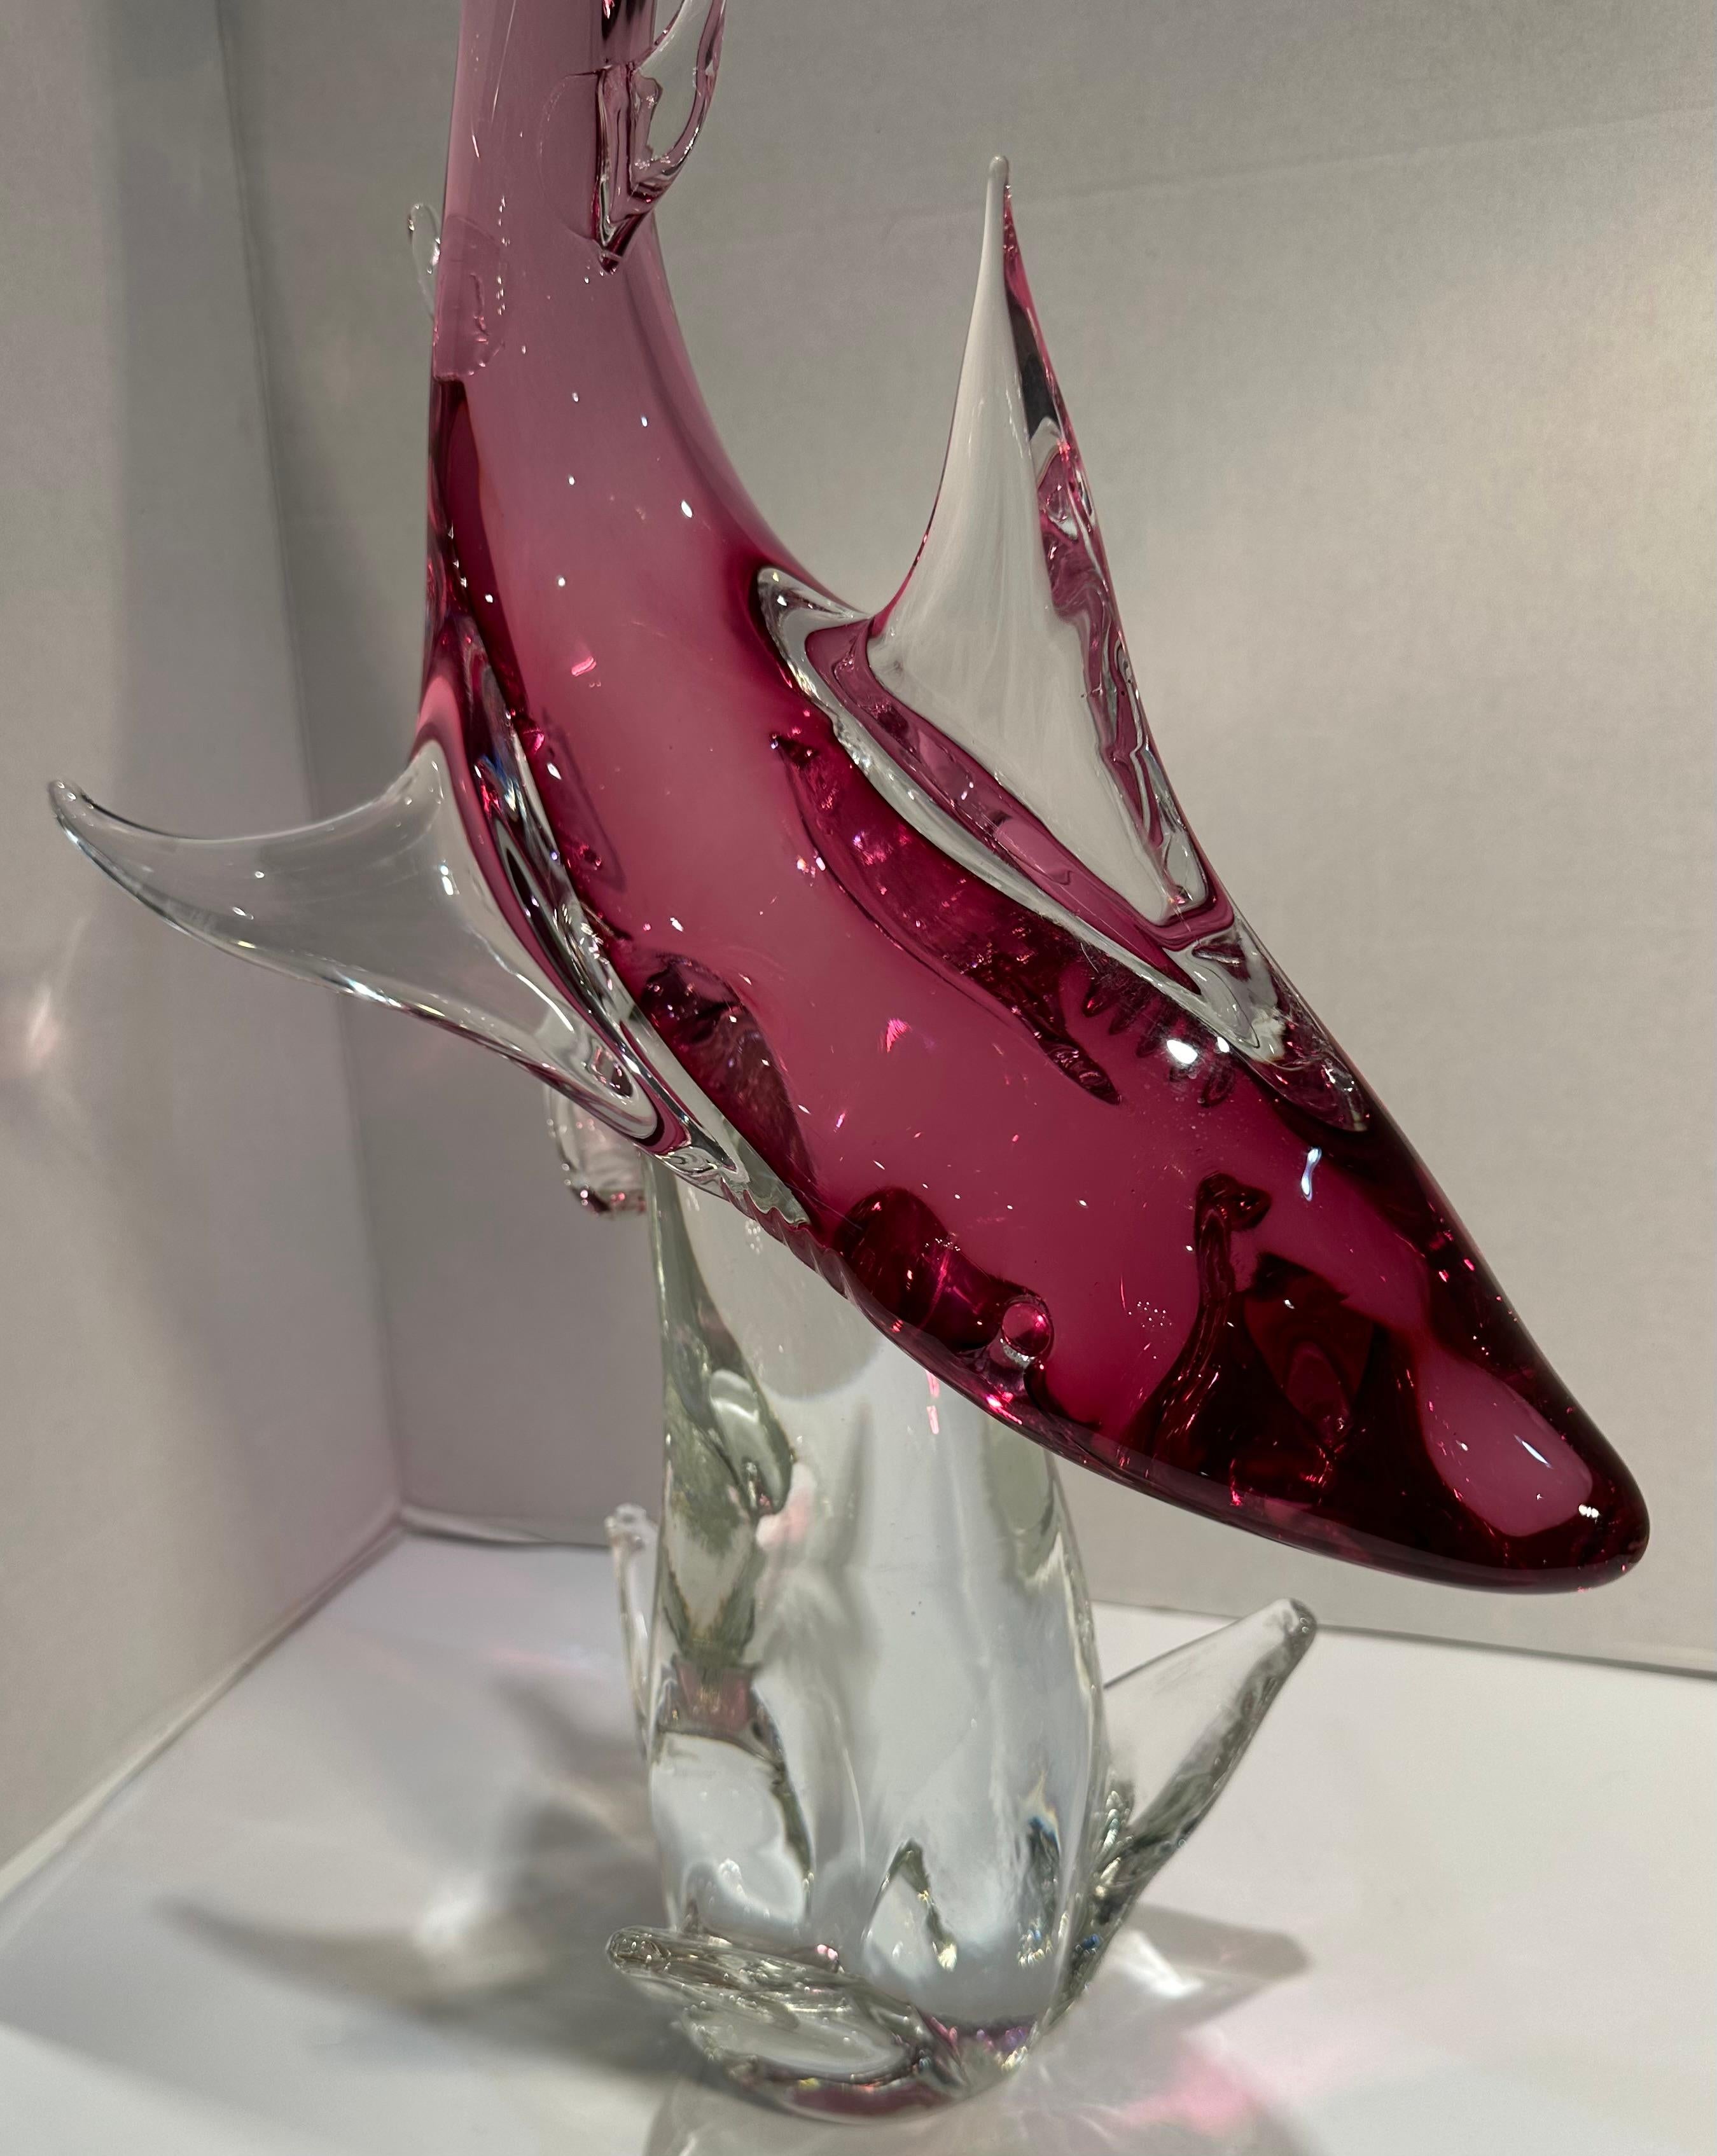 Impressive Over Two Feet Tall Murano Art Glass Hot Pink Shark on a Wave Figurine For Sale 5